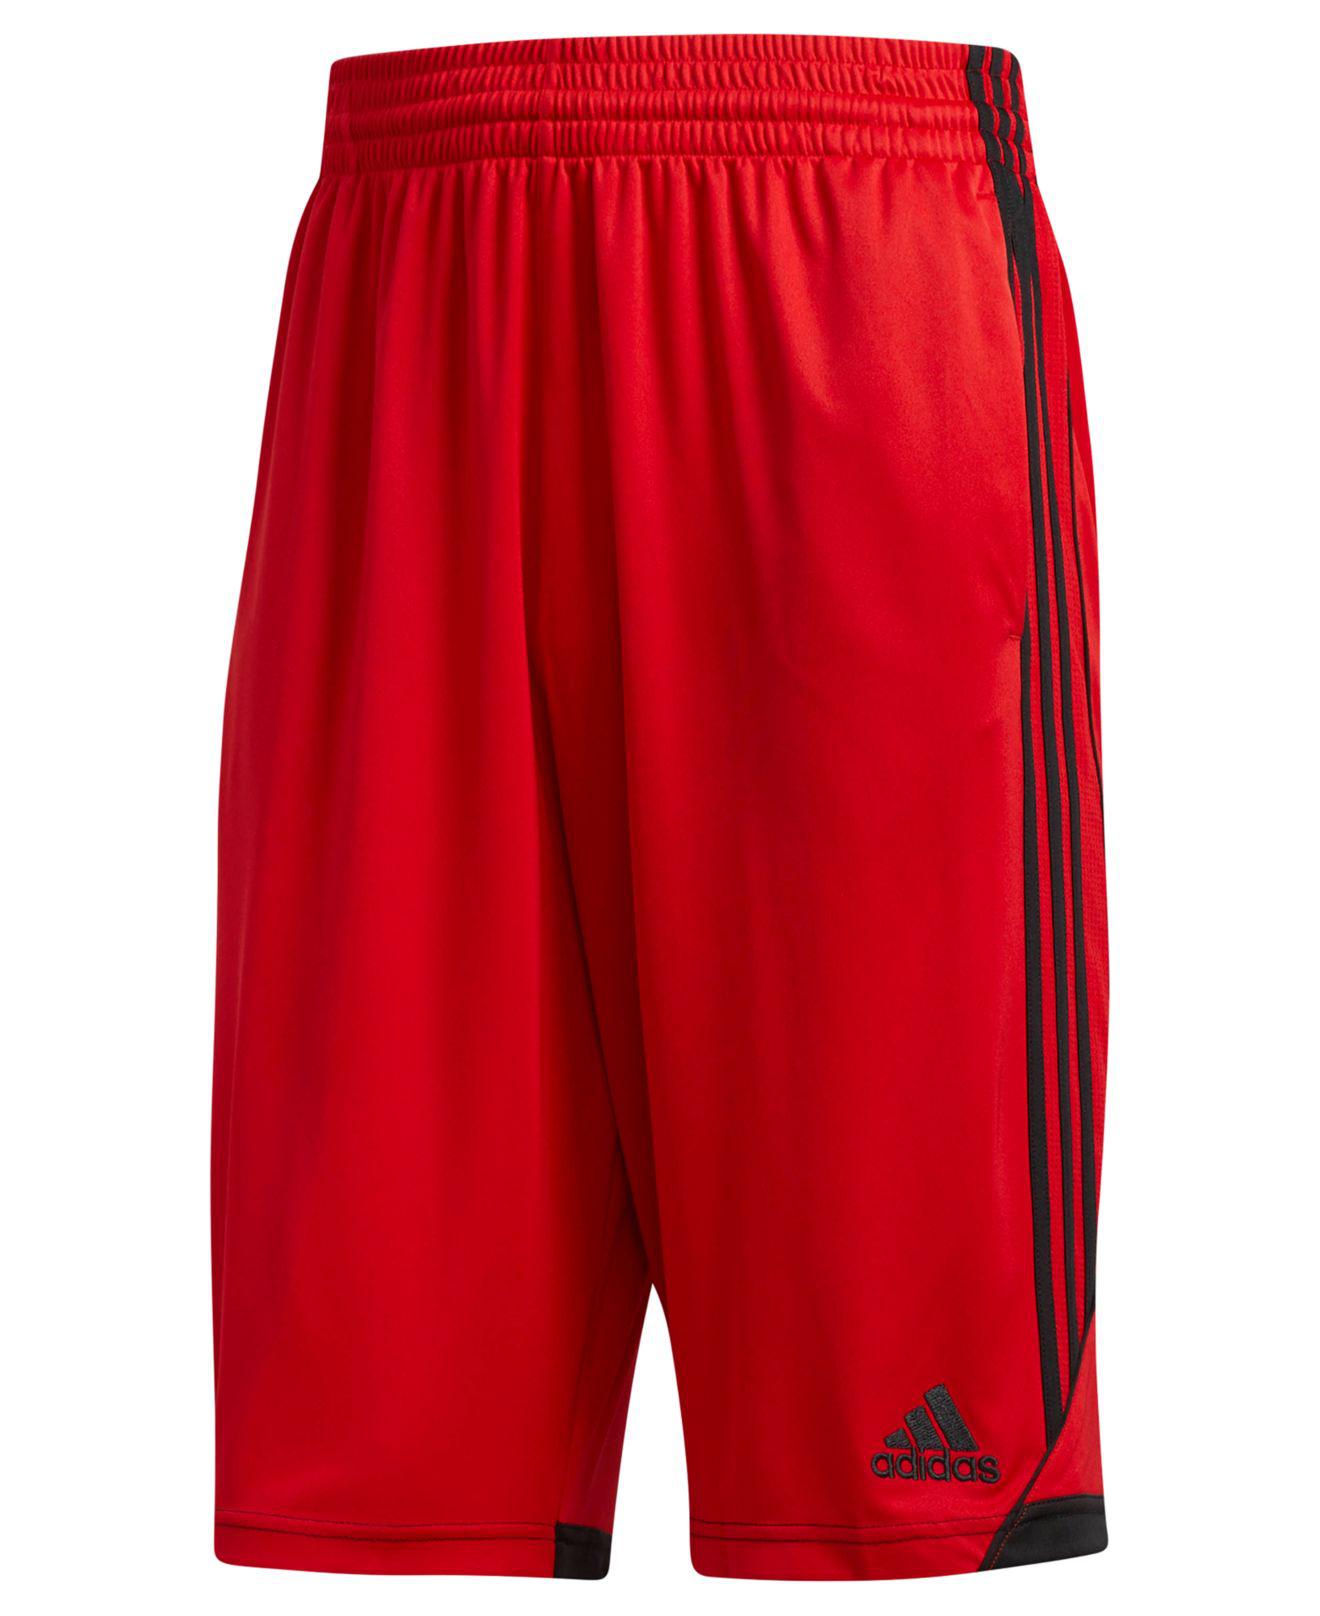 adidas Synthetic Climalite® 3g Basketball Shorts in Scarlet/Black Men - Lyst